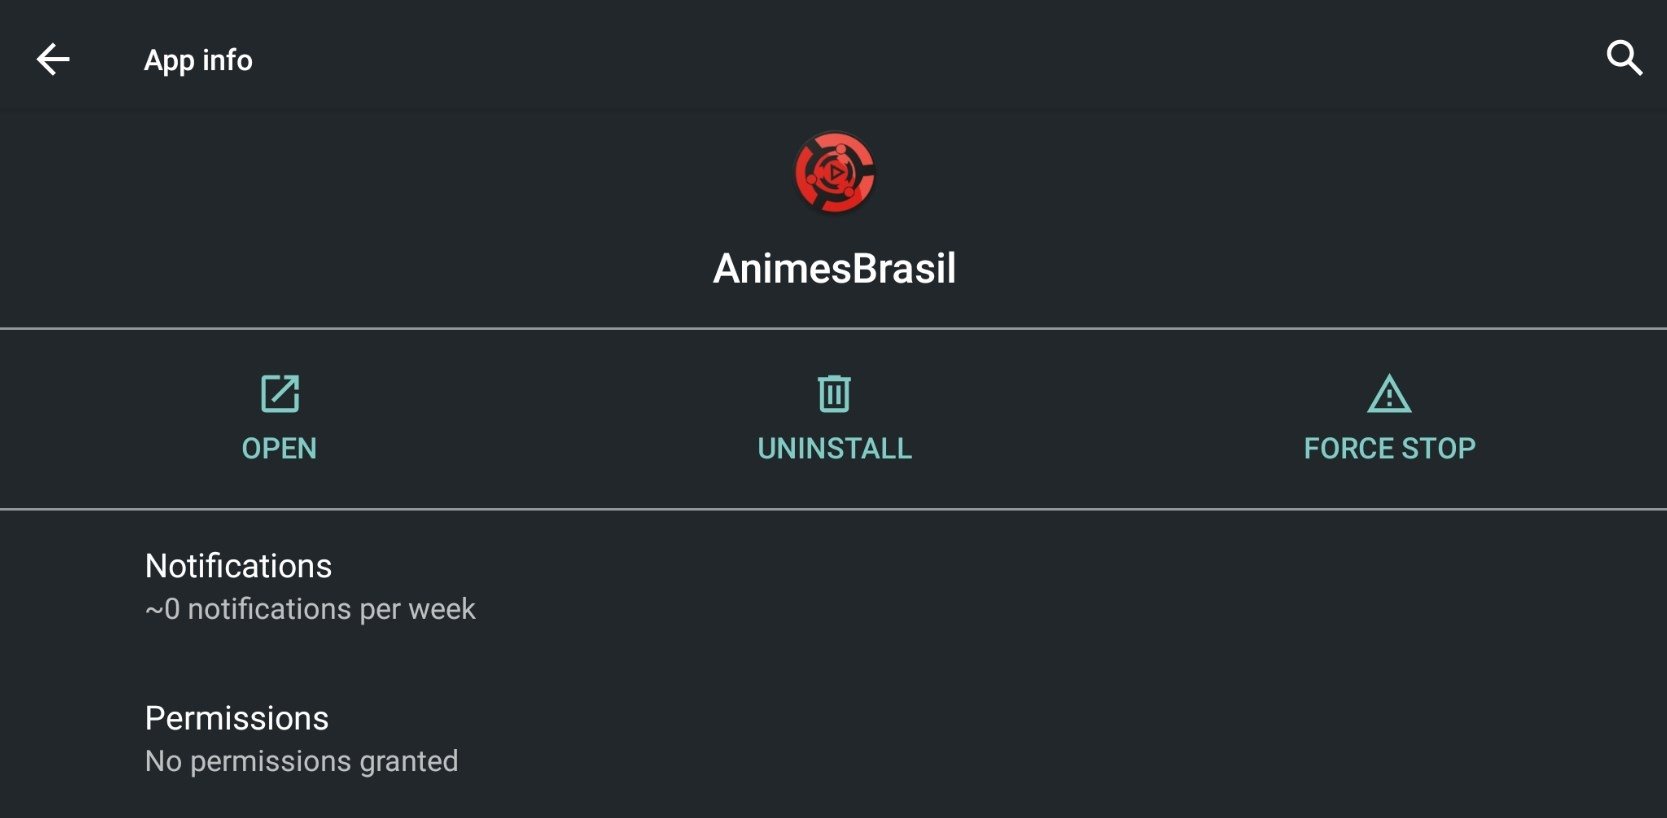 Animes Brasil Apk Download for Android- Latest version 1.7.6-  com.anmbrphoenix